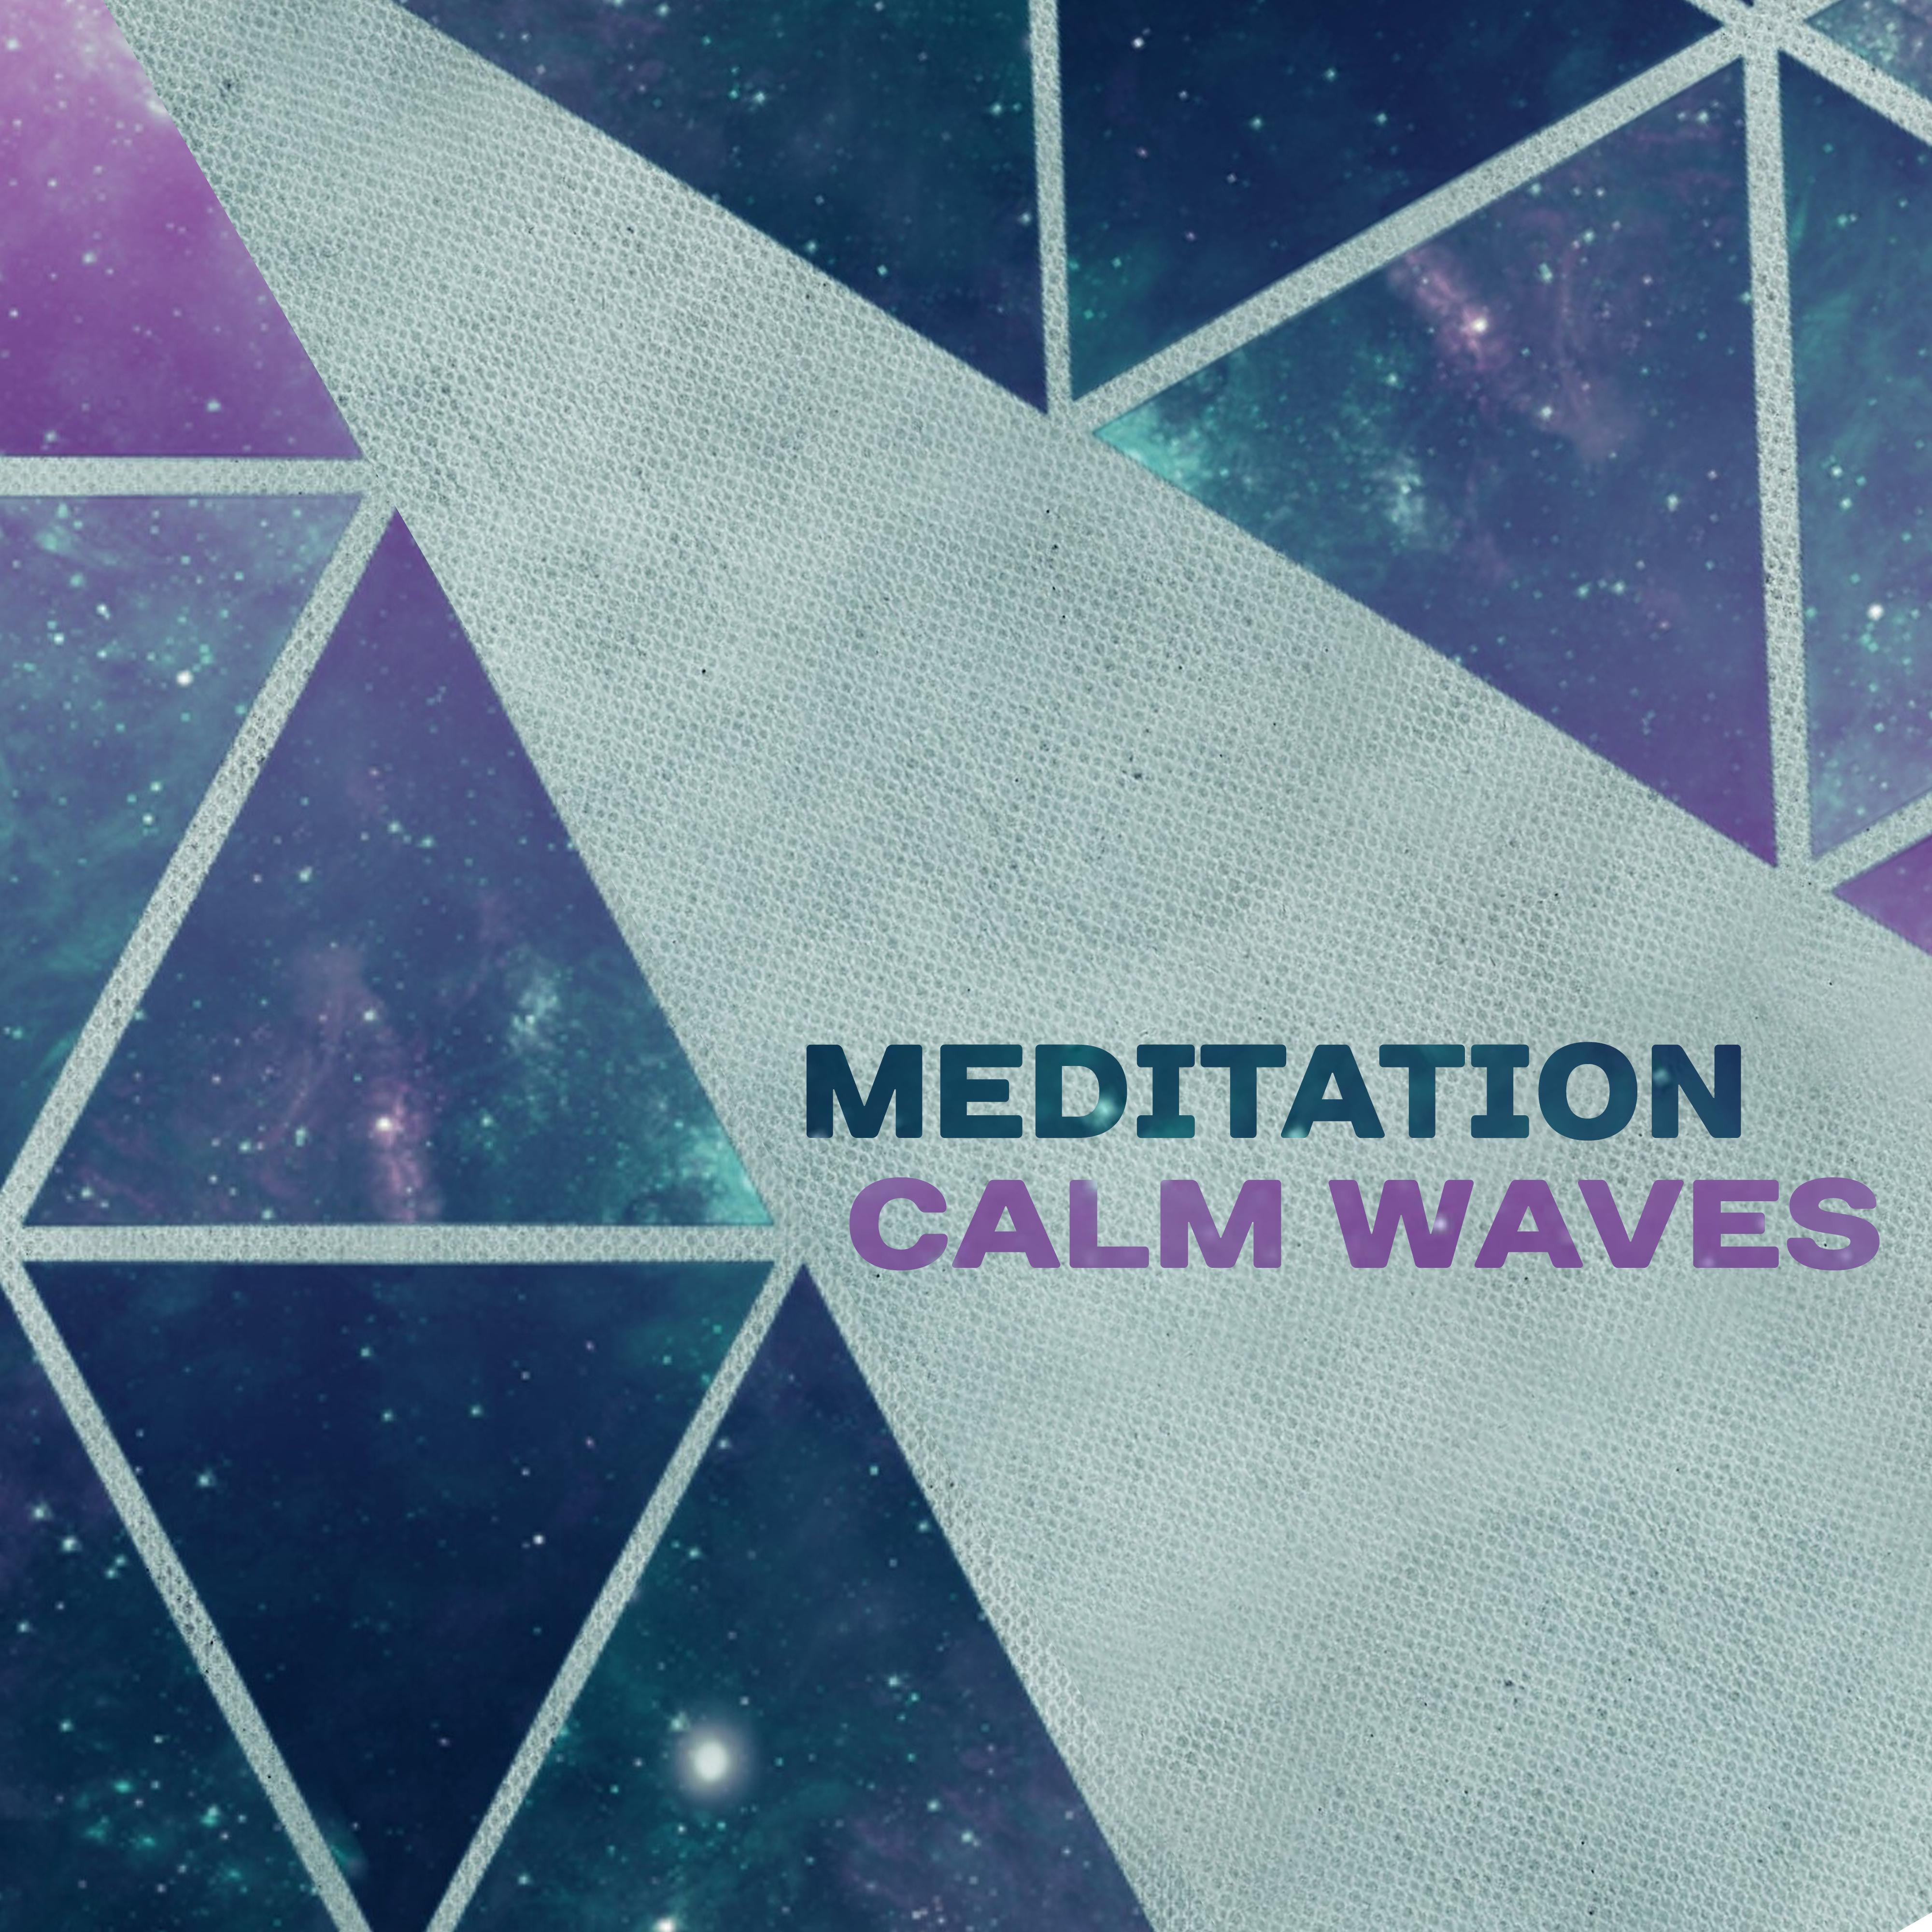 Meditation Calm Waves – Soft New Age Music, Relaxing Sounds, Chilled Waves, Mind Control